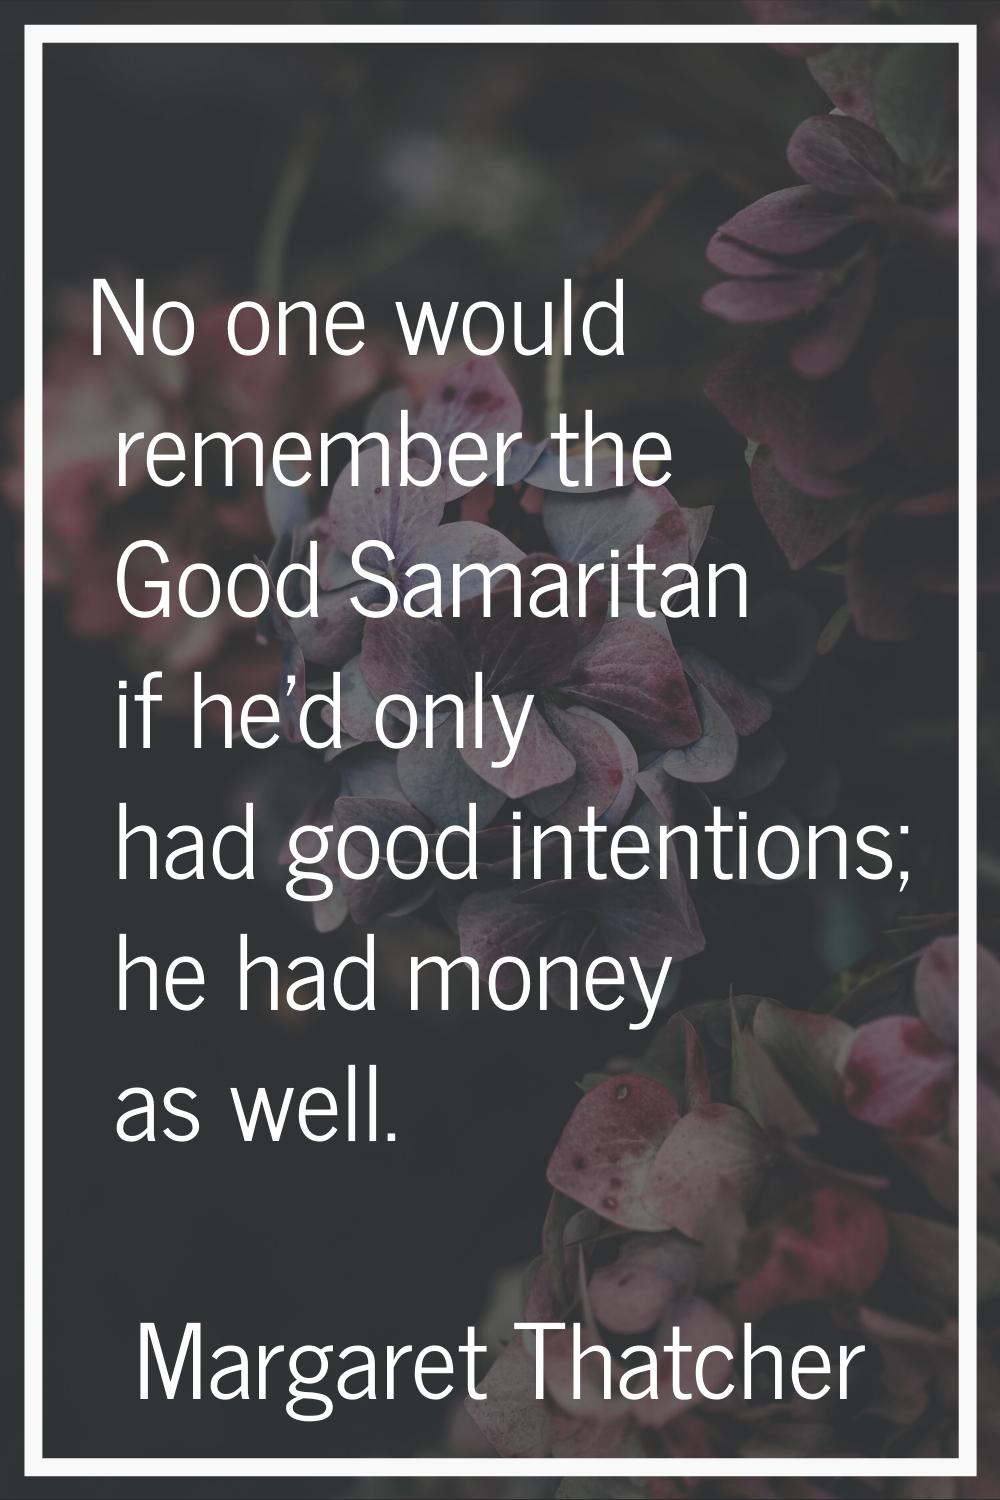 No one would remember the Good Samaritan if he'd only had good intentions; he had money as well.